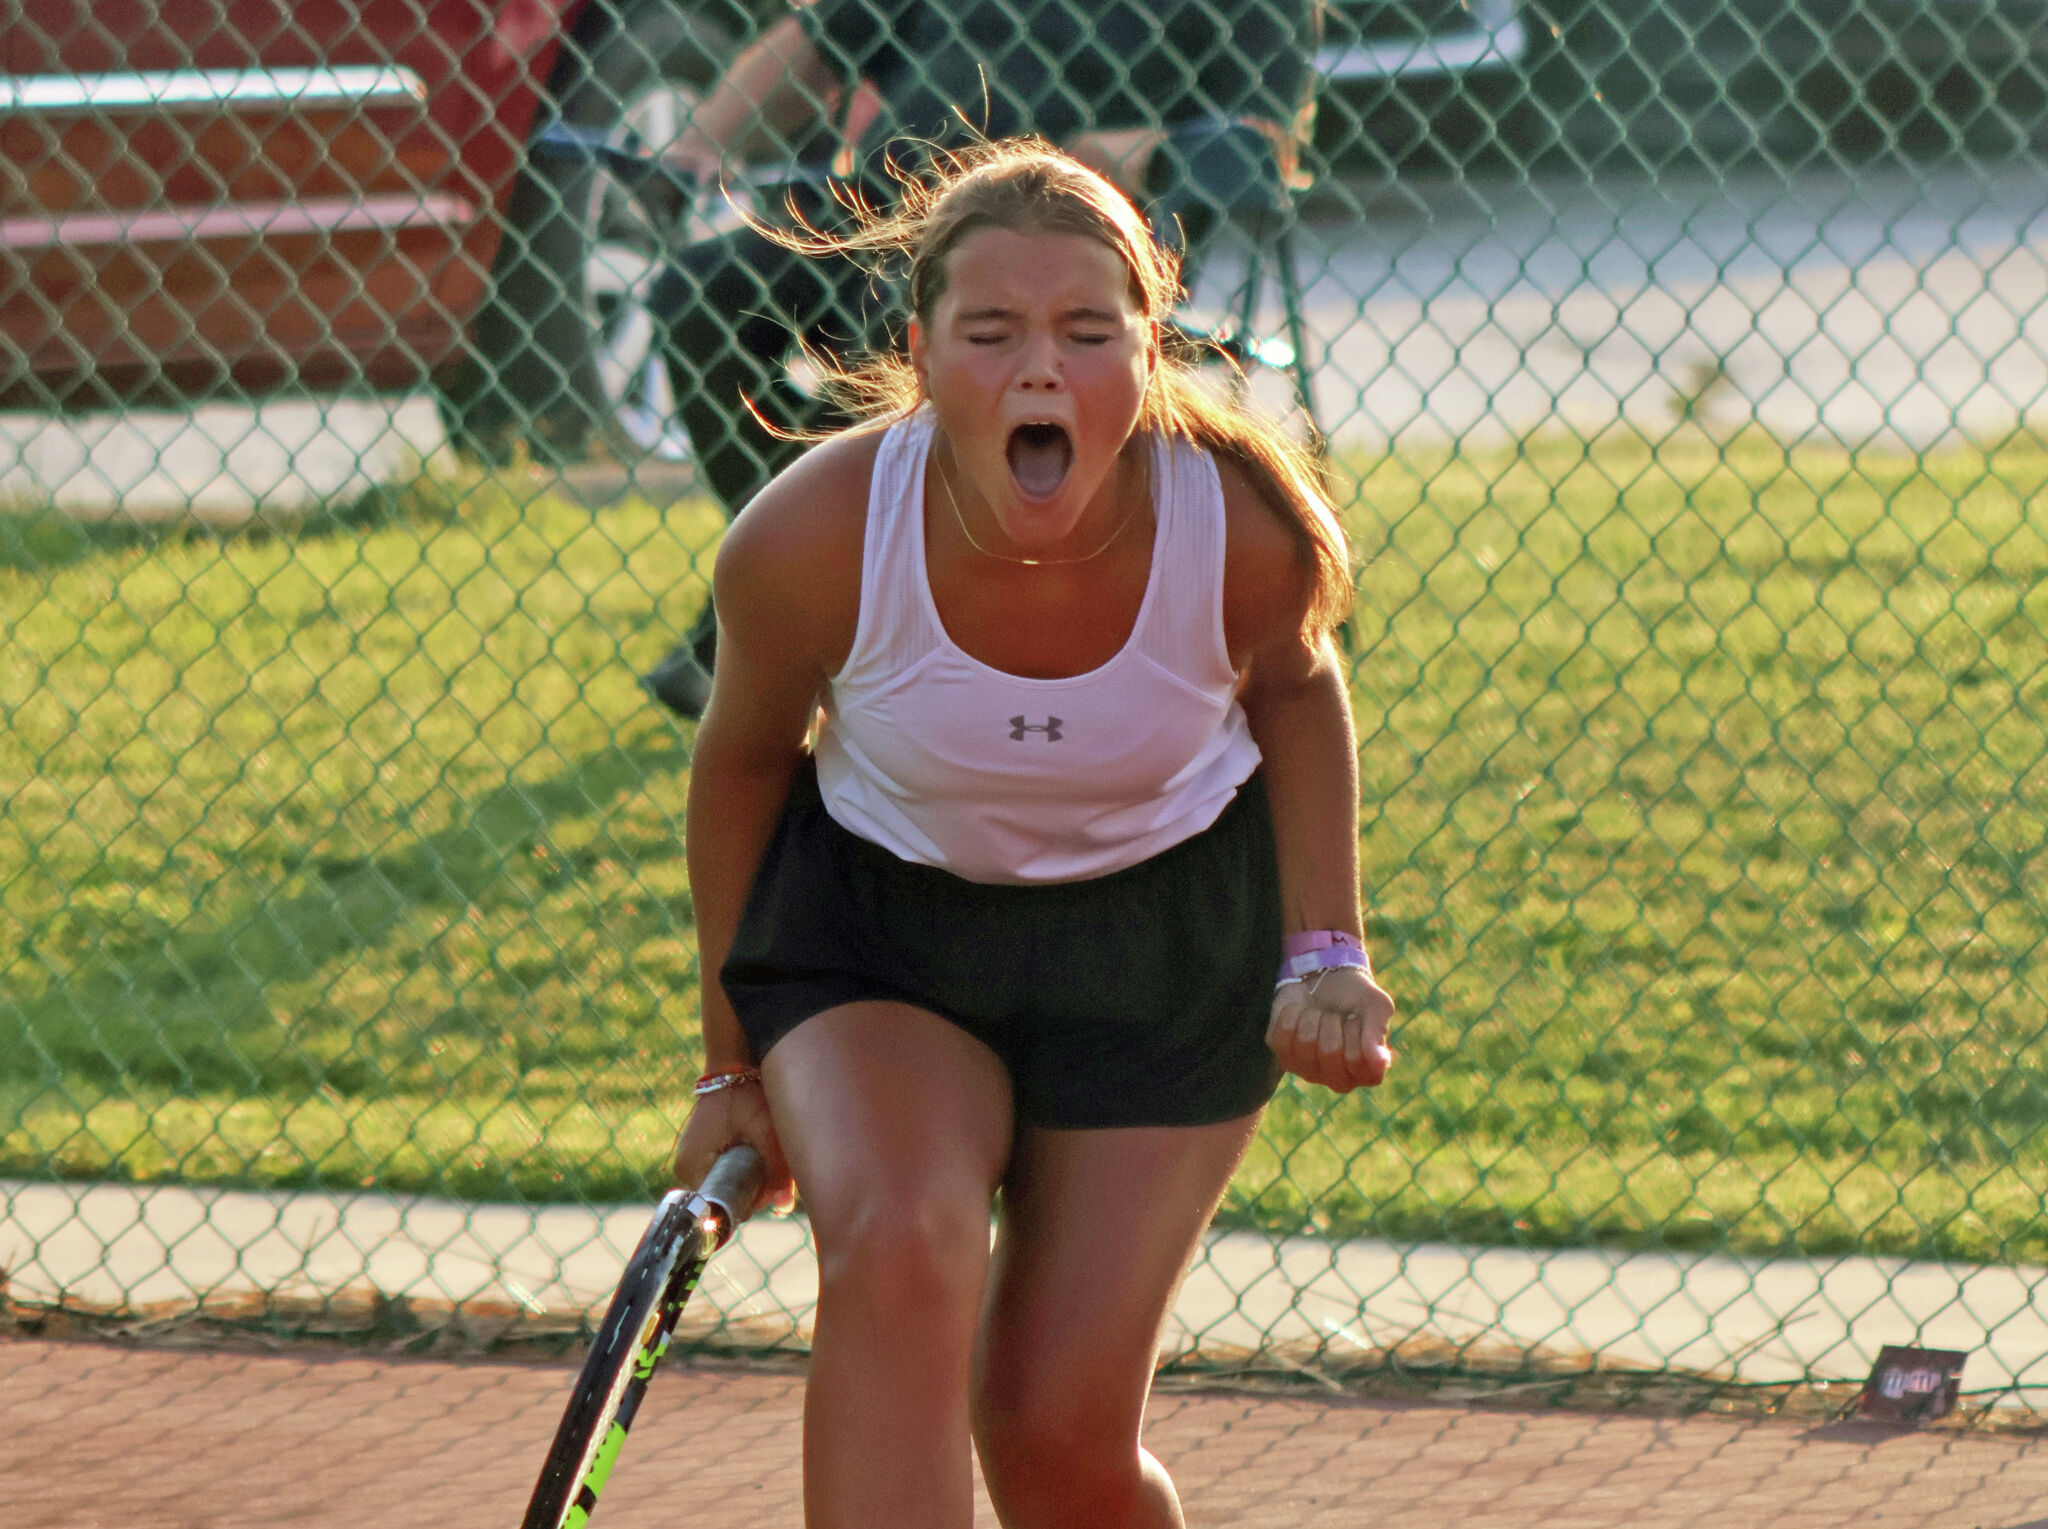 Edwardsville’s Katie Woods steps up at No. 1 singles